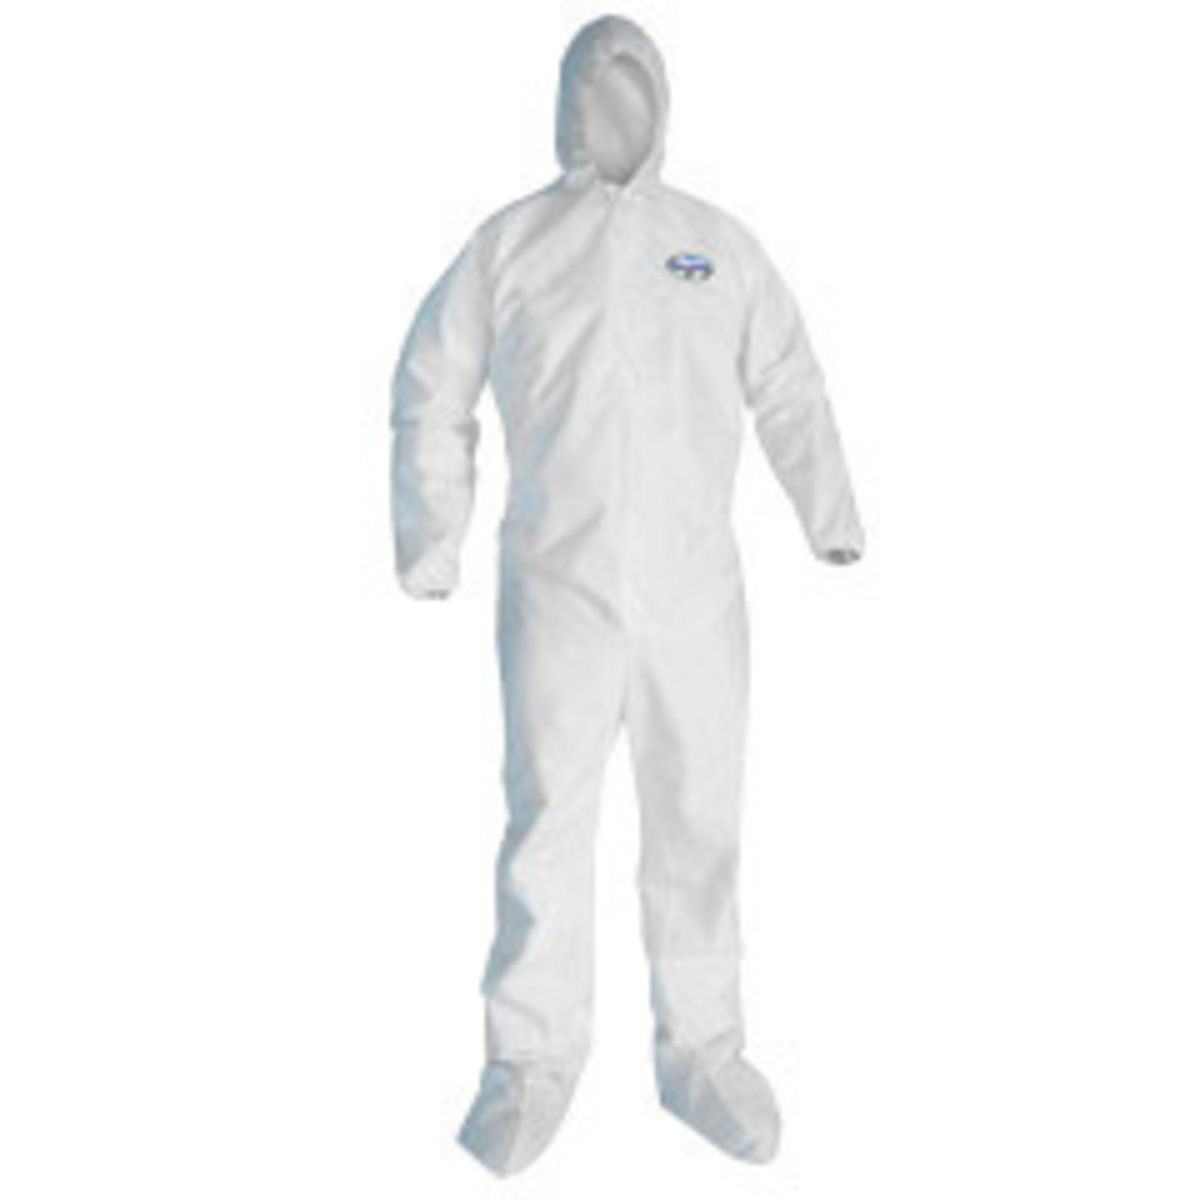 5X/6X White KleenGuard* A45 Film Laminate Bib Overalls/Coveralls (Availability restrictions apply.)